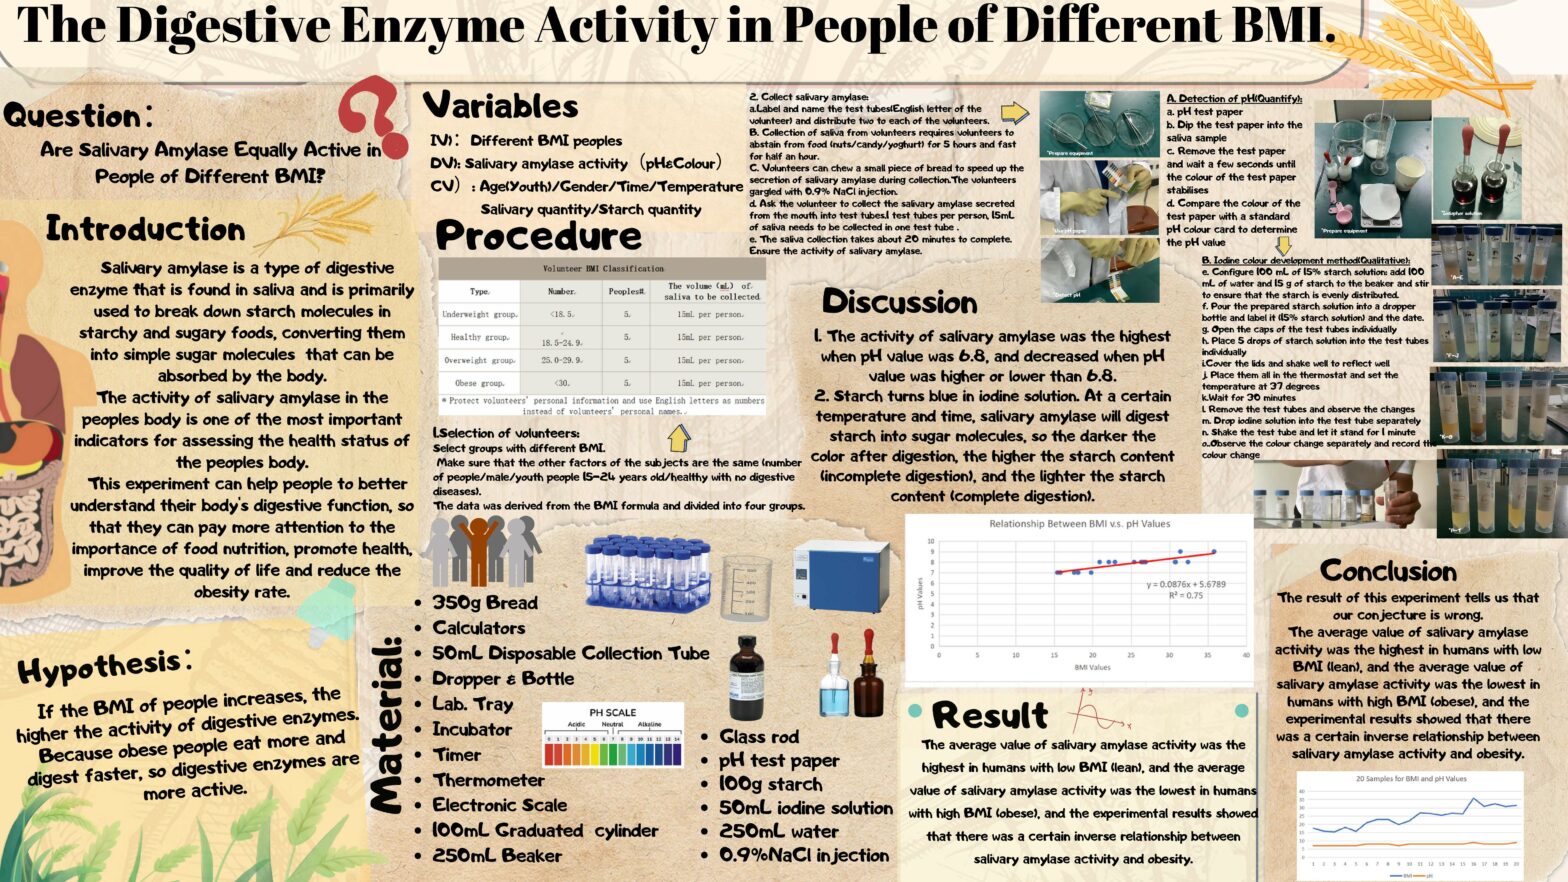 The Digestive Enzyme Activity in People of Different BMI